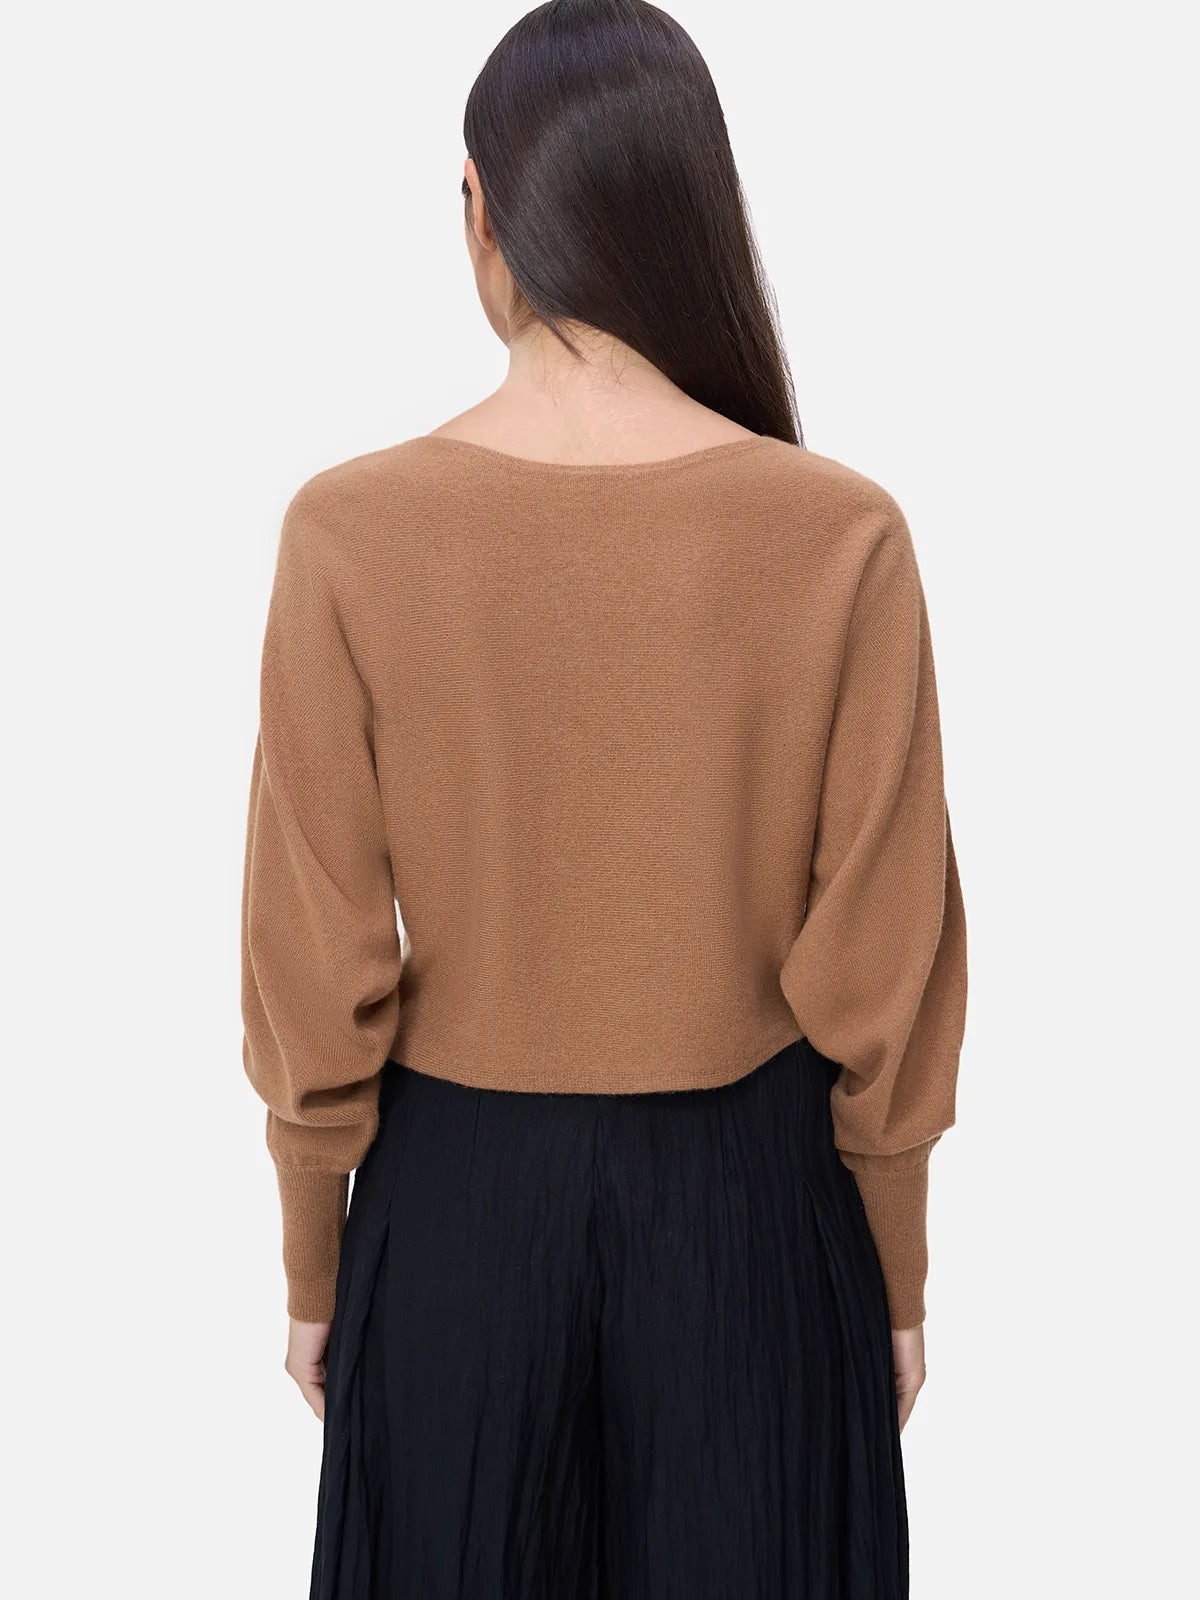 Versatile Round Neck Cashmere Sweater with Short Batwing Sleeves